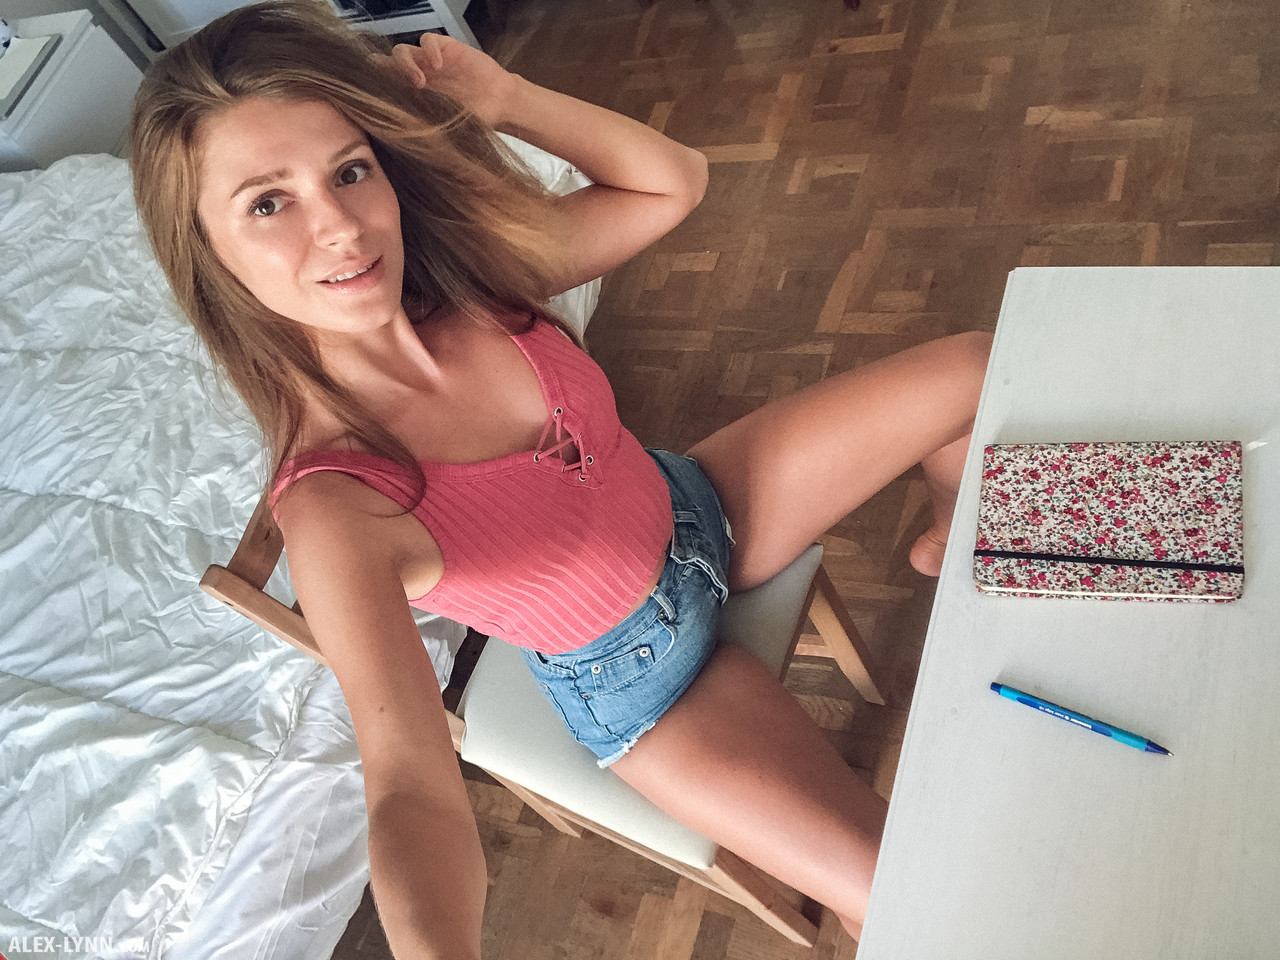 Russian spinner Kalisy uses a selfie stick for taking nude selfies  